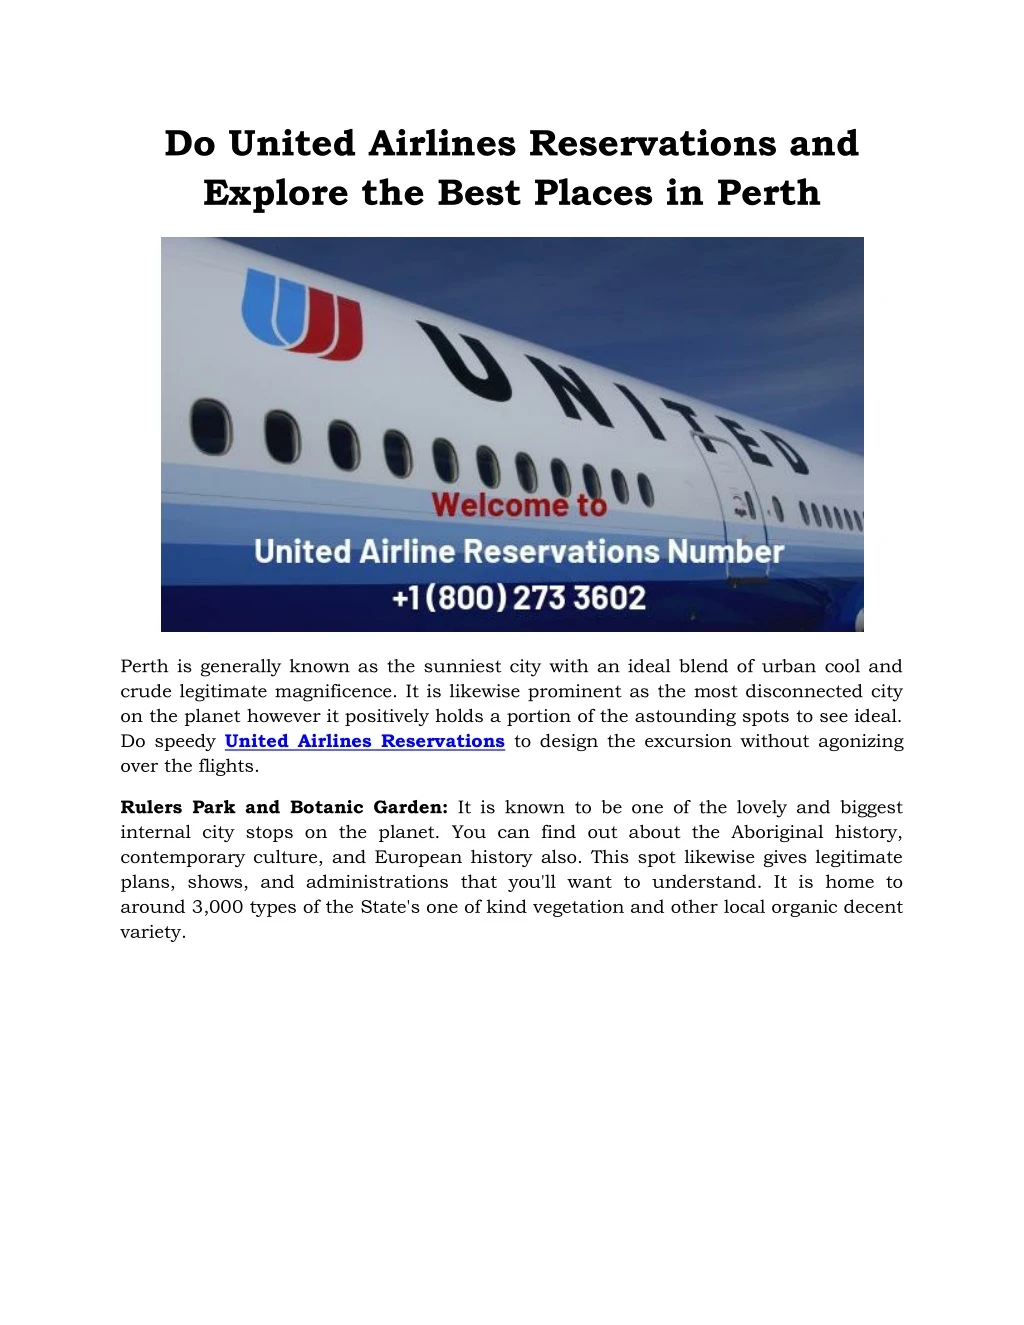 do united airlines reservations and explore